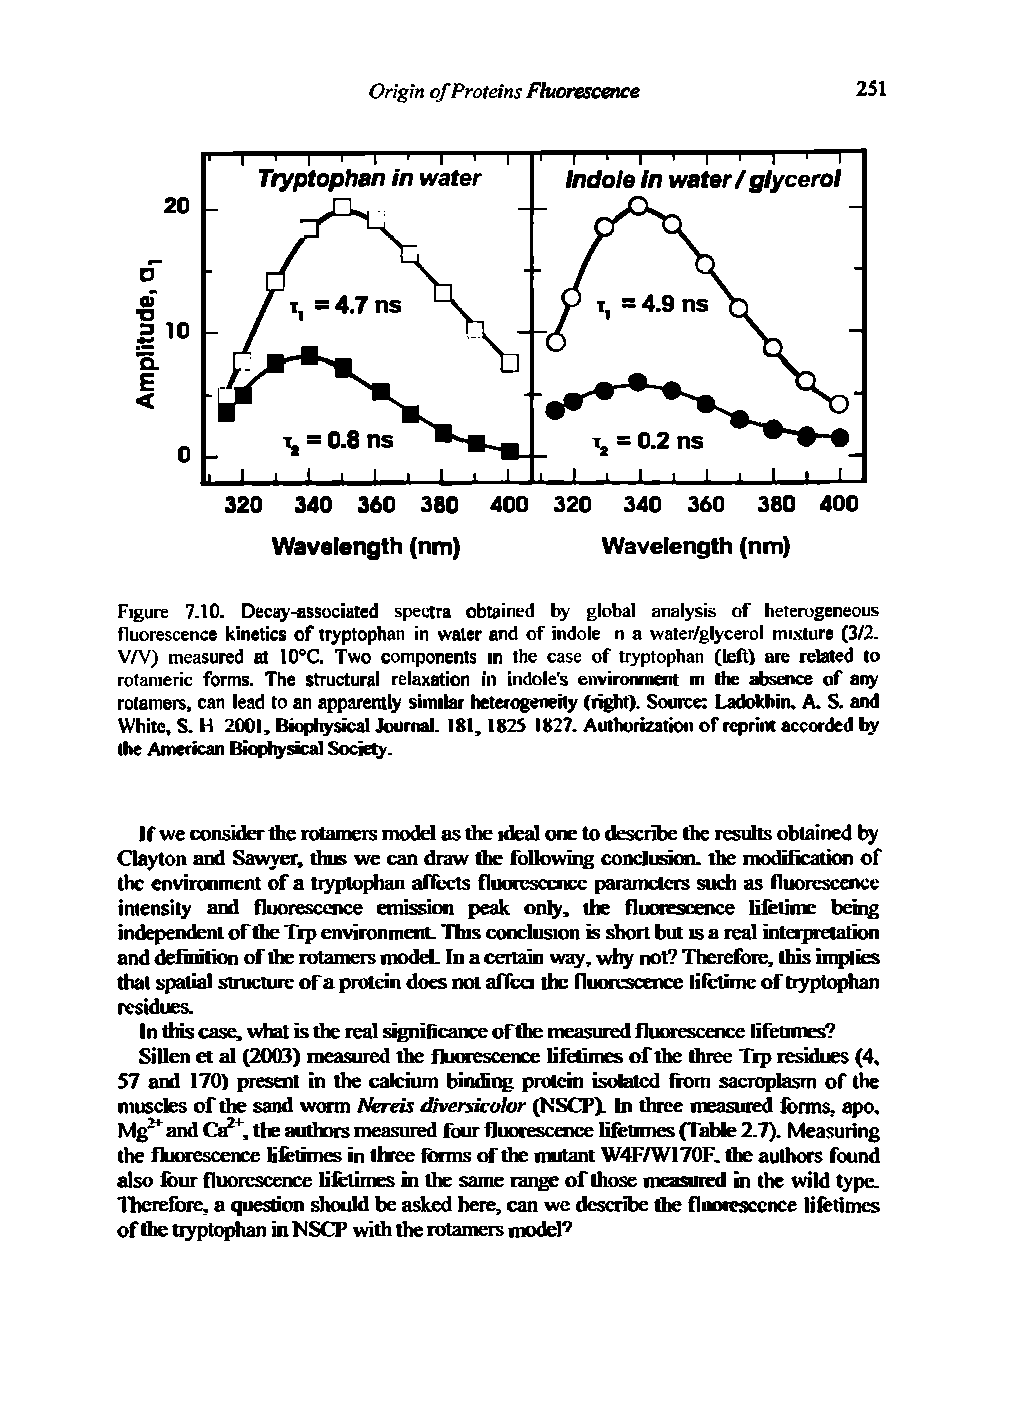 Figure 7.10. Decay-associated spectra obtained global analysis of heterogeneous fluorescence kinetics of tryptophan in water and of indole n a water/glycerol mixture (3/2. V/V) measured at lO C. Two components in the case of tryptophan (lelt) are related to rotanieric forms. The structural relaxation in indole s environment m tfie abseiKe of any rolamers, can lead to an apparently similar heterogeneHy (r ht). Source LadoMiiru A. S. and White, S. H 2001, Biopl sical Journal. 181,1825 1827. Authorization of reprint accorded the American Biophysica] Sooe. ...